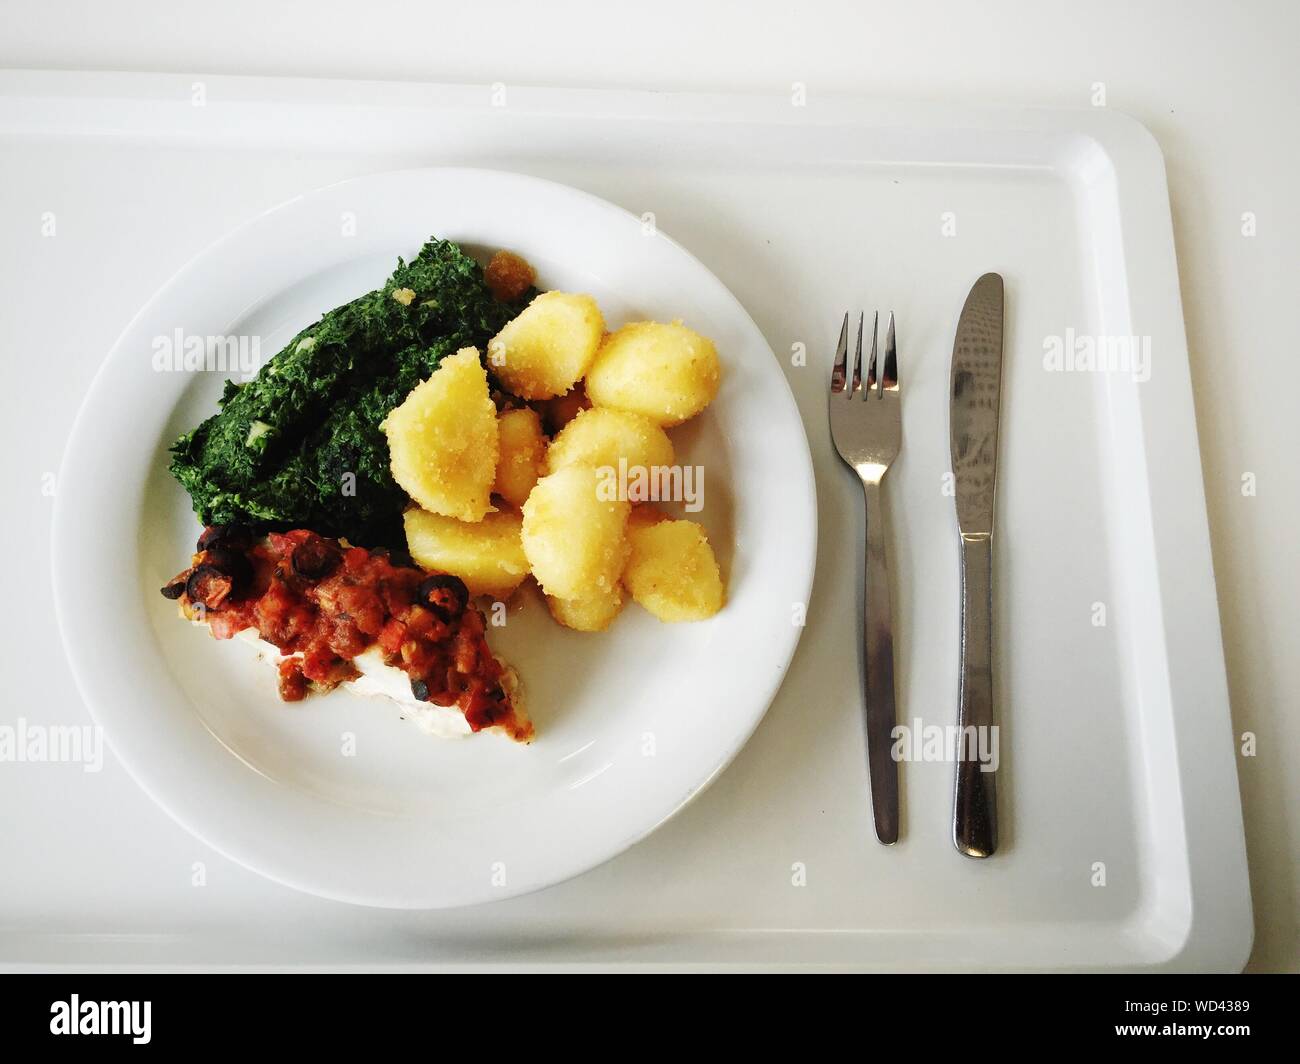 Fish With Gravy From Vegetables Stock Photo